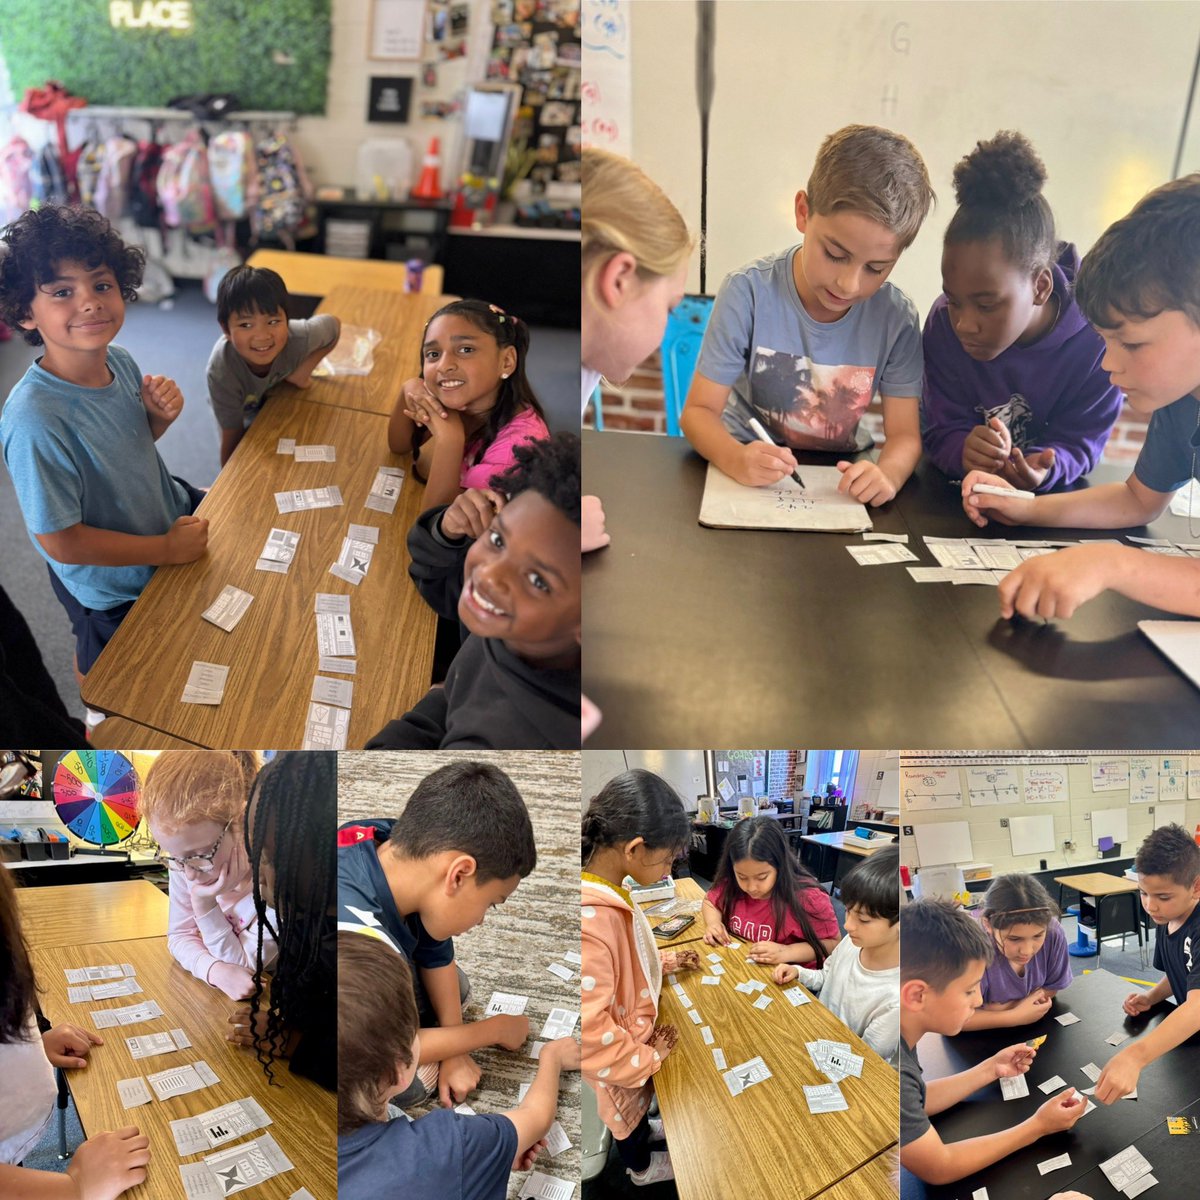 3rd grade math rocking review began today! Thank you @GabeKeese for your guidance for a successful launch of rocking review! I can’t wait to see how these kids “rock” the STAAR test! @lead4ward 🤝